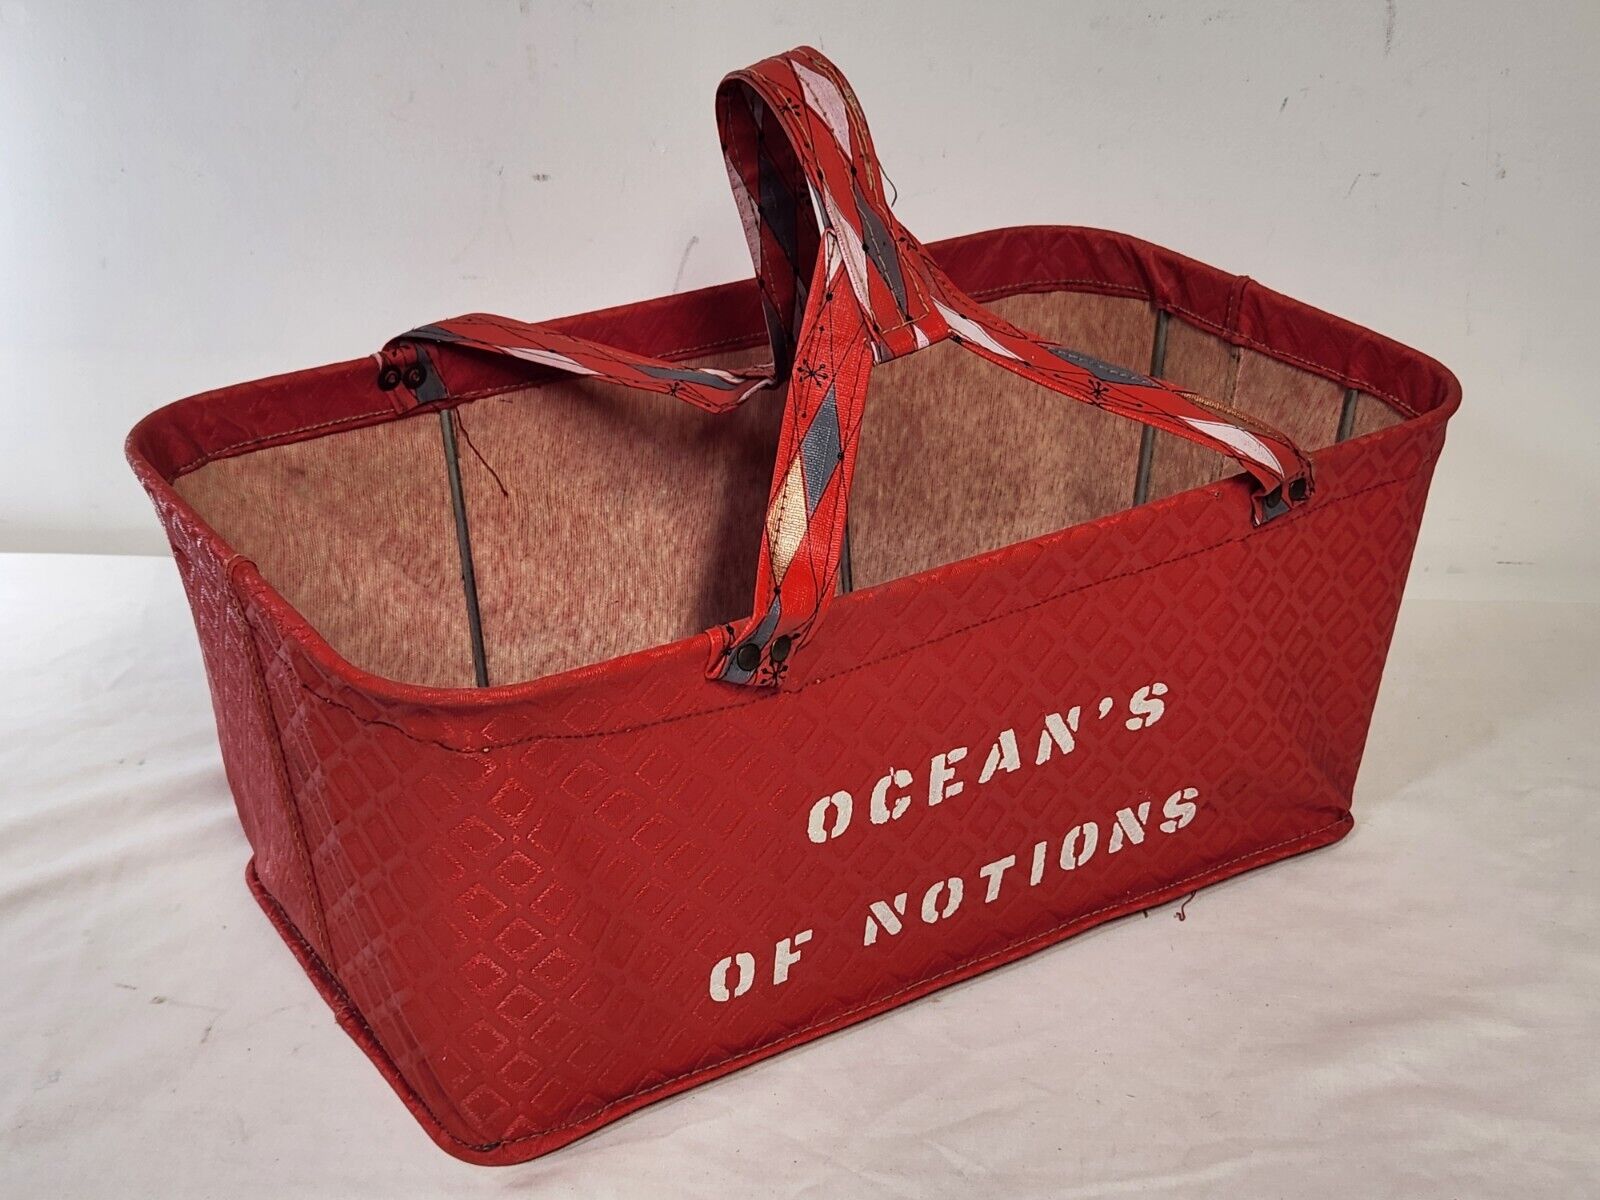 Vintage Shopping Basket Handy Folding Pail Co. Ocean's of Notions 1950's 1960's